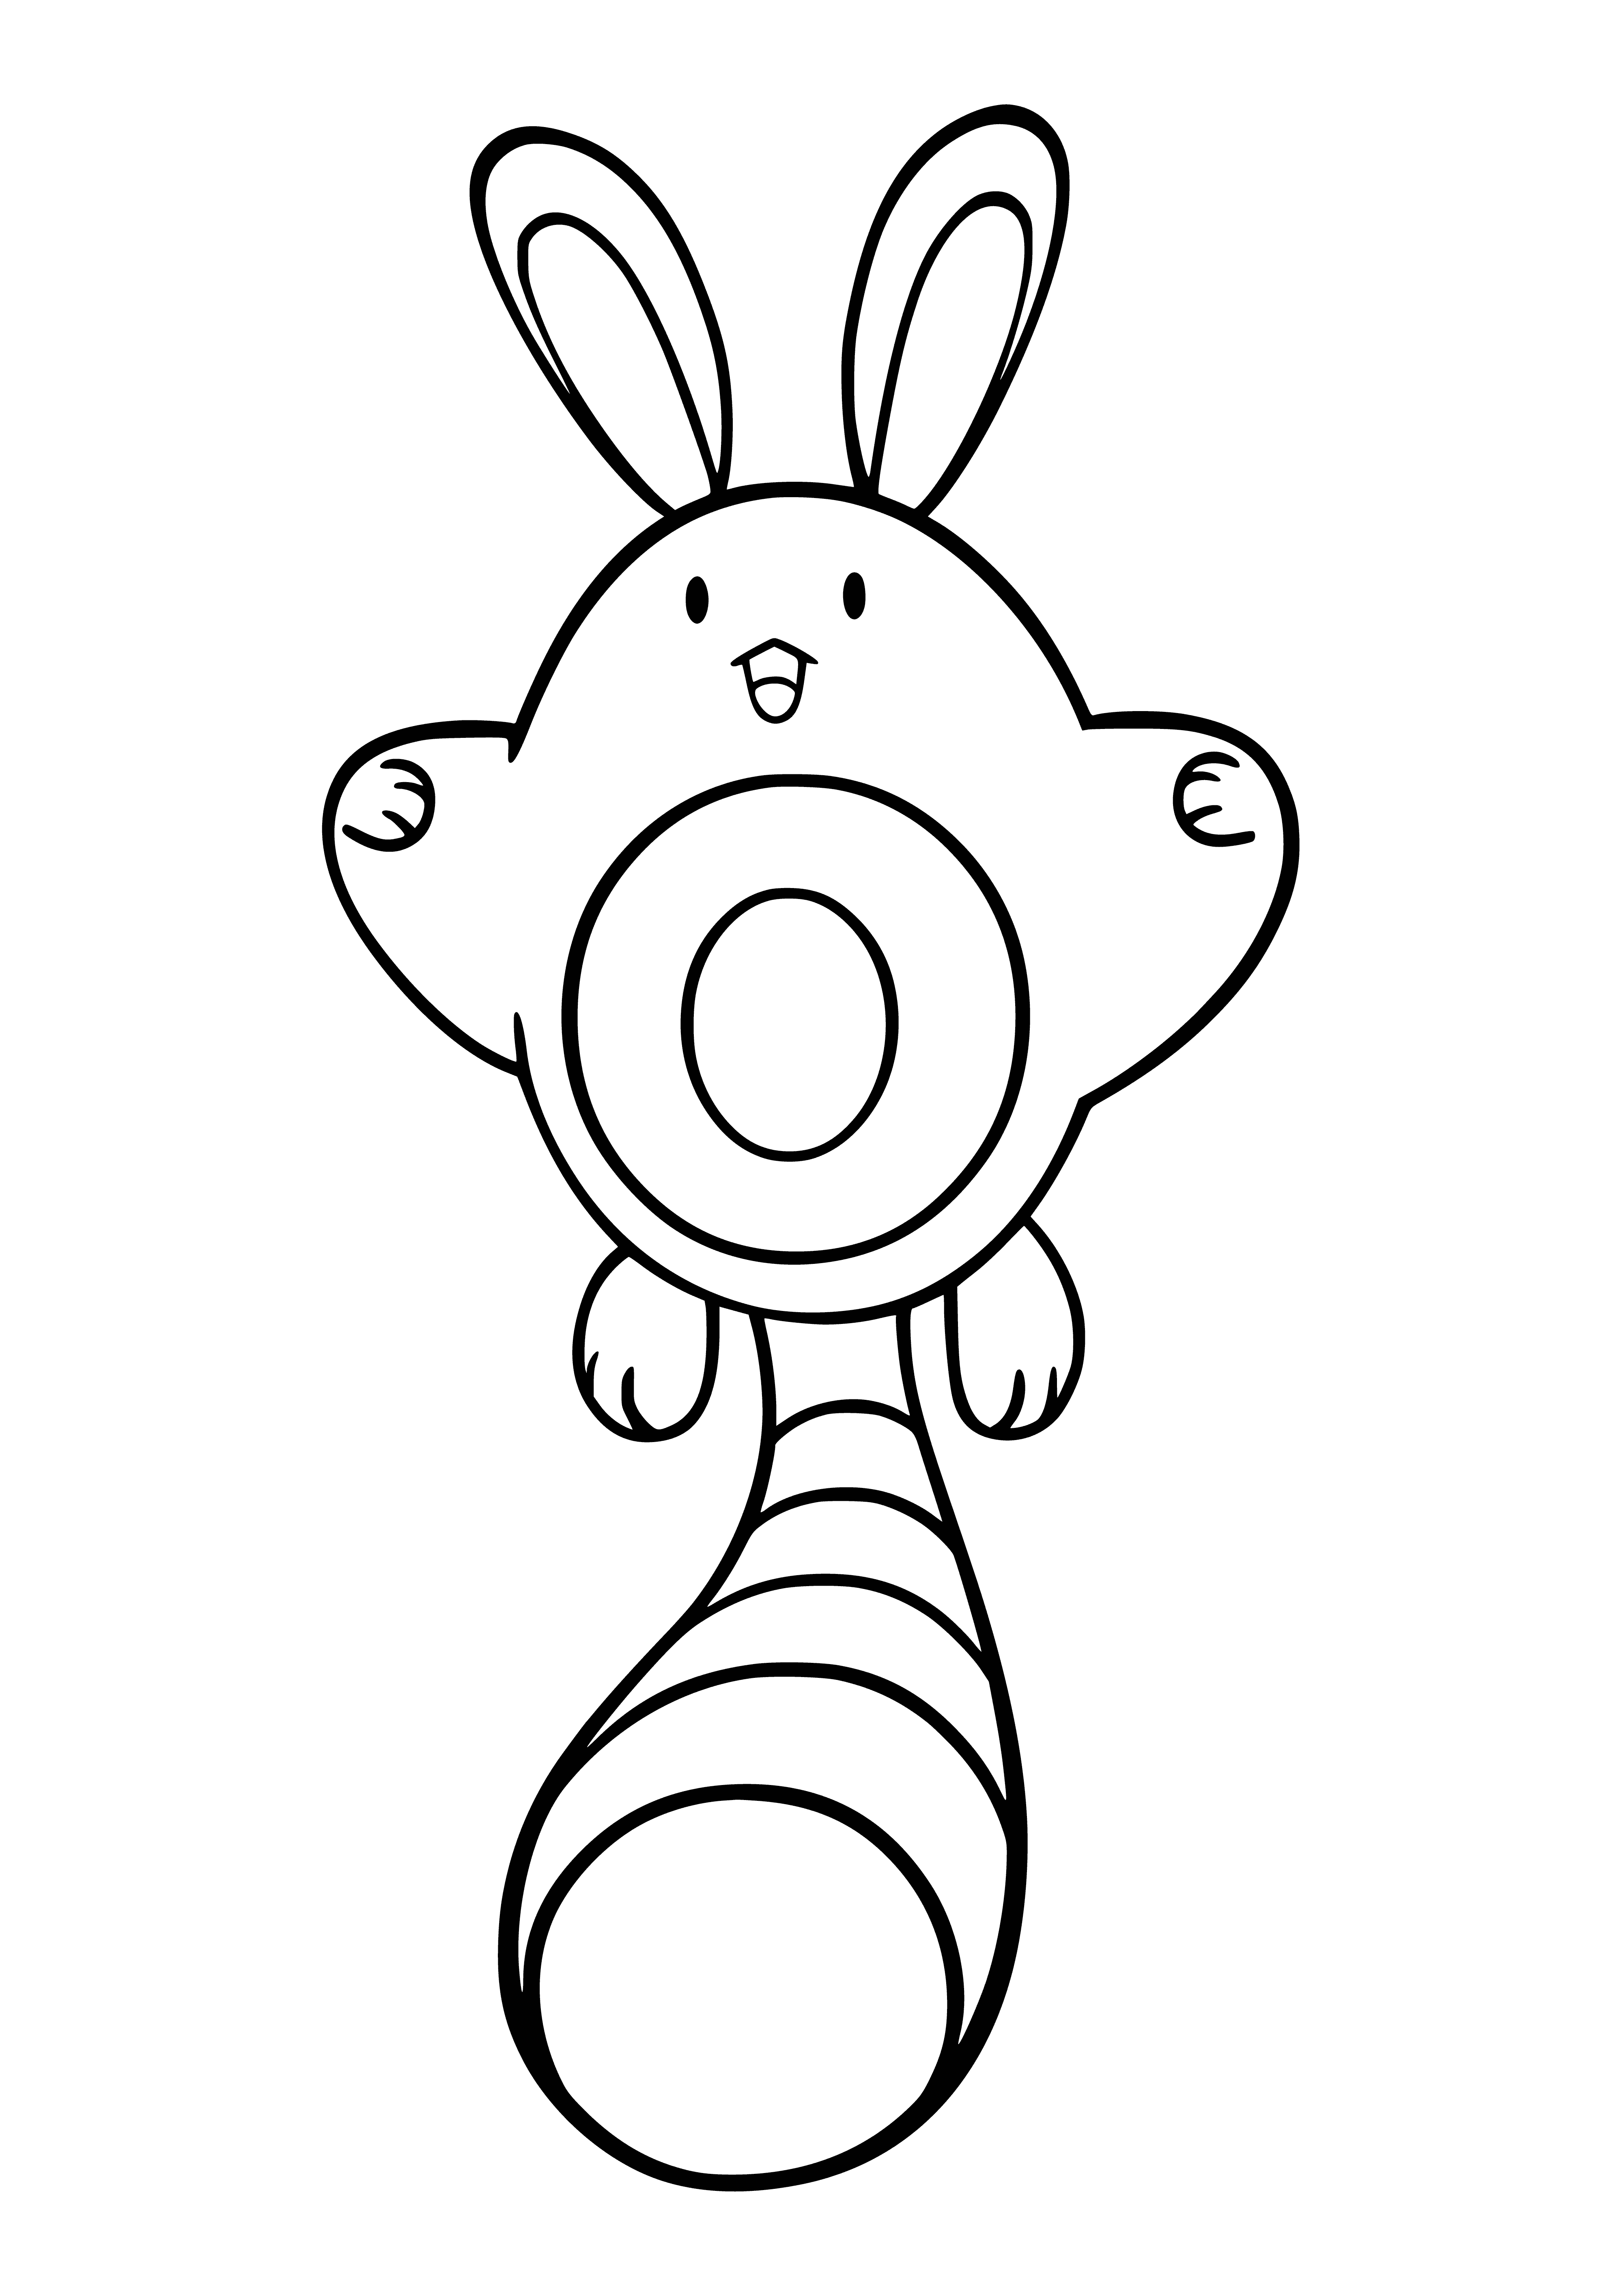 coloring page: Sentret is a small, brown Pokémon w/ a yellow stripe, round black eyes, 4 short legs w/ paw pads, & a long thin tail w/ black tip. Flexible & can stand on hind legs.